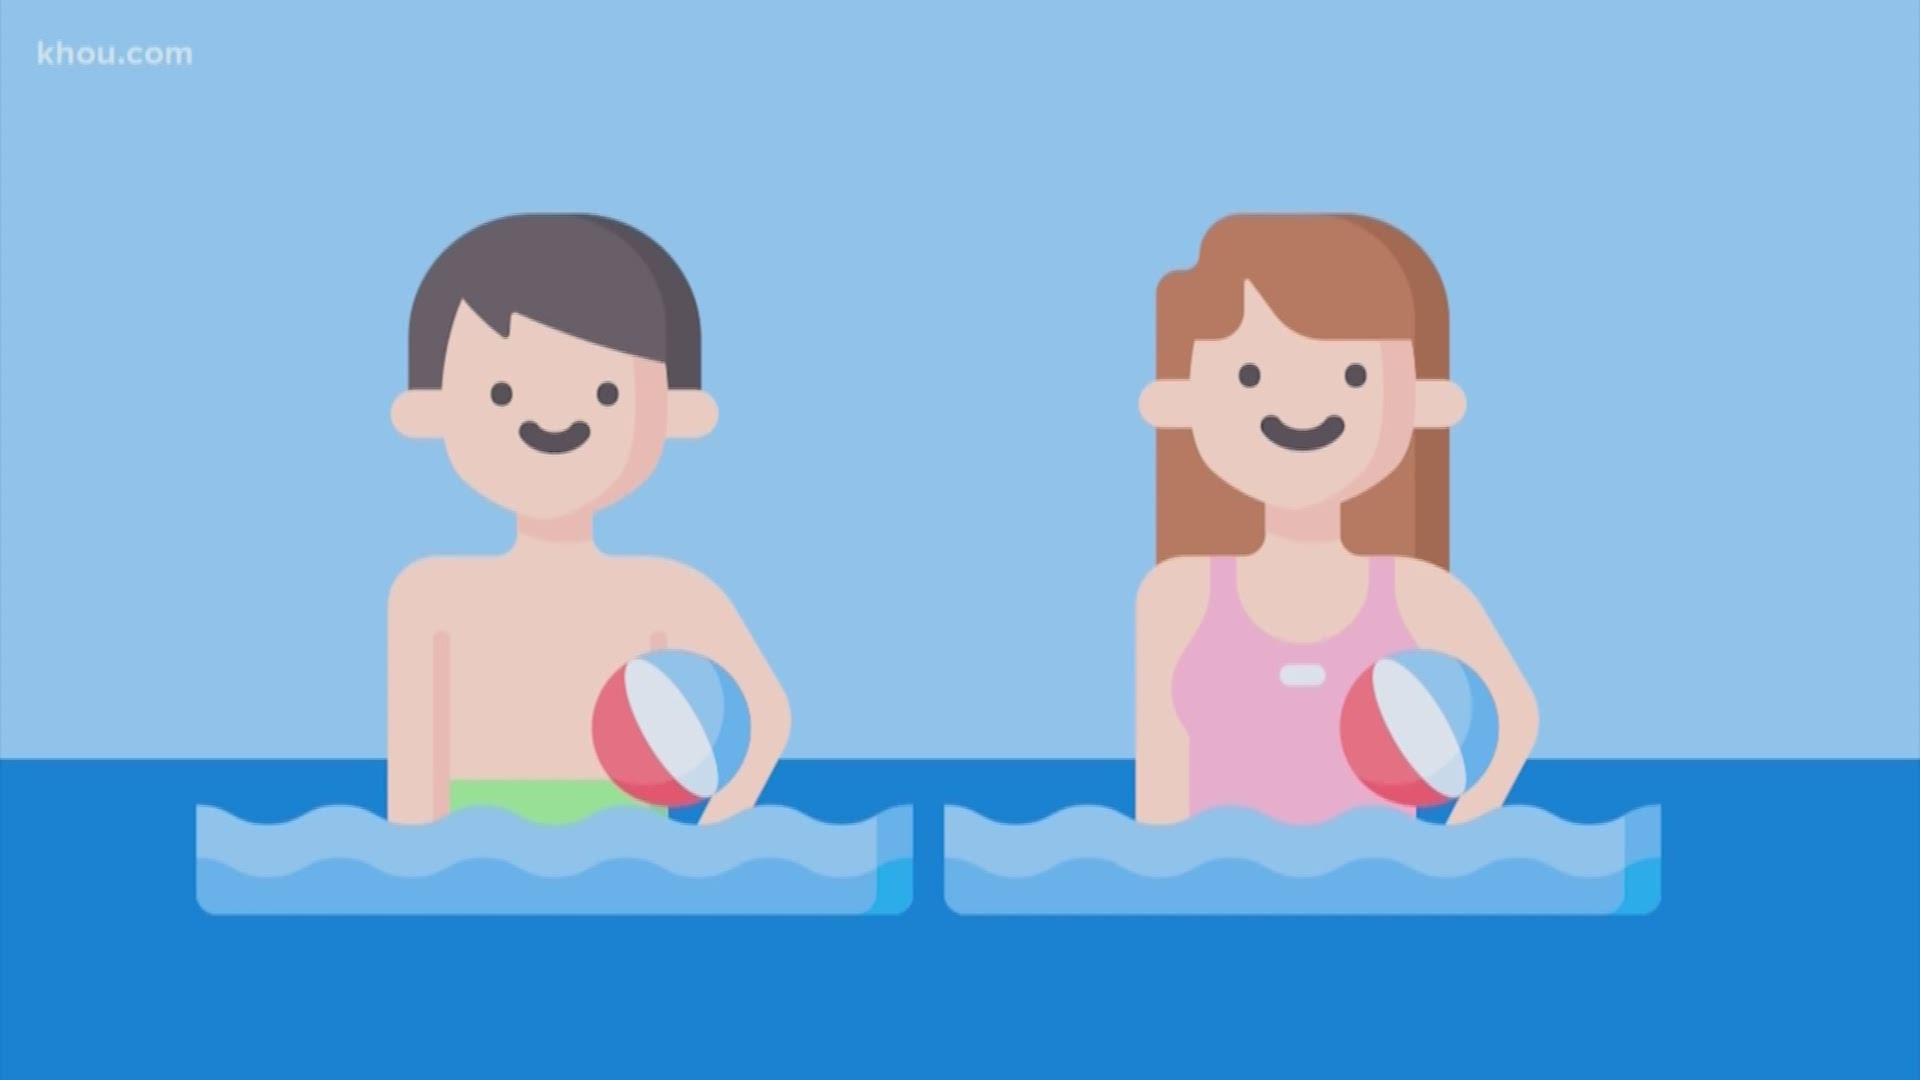 It's been a dangerous summer with several children and adults getting into trouble in the water. Here are some numbers about water safety and drownings to keep in mind.